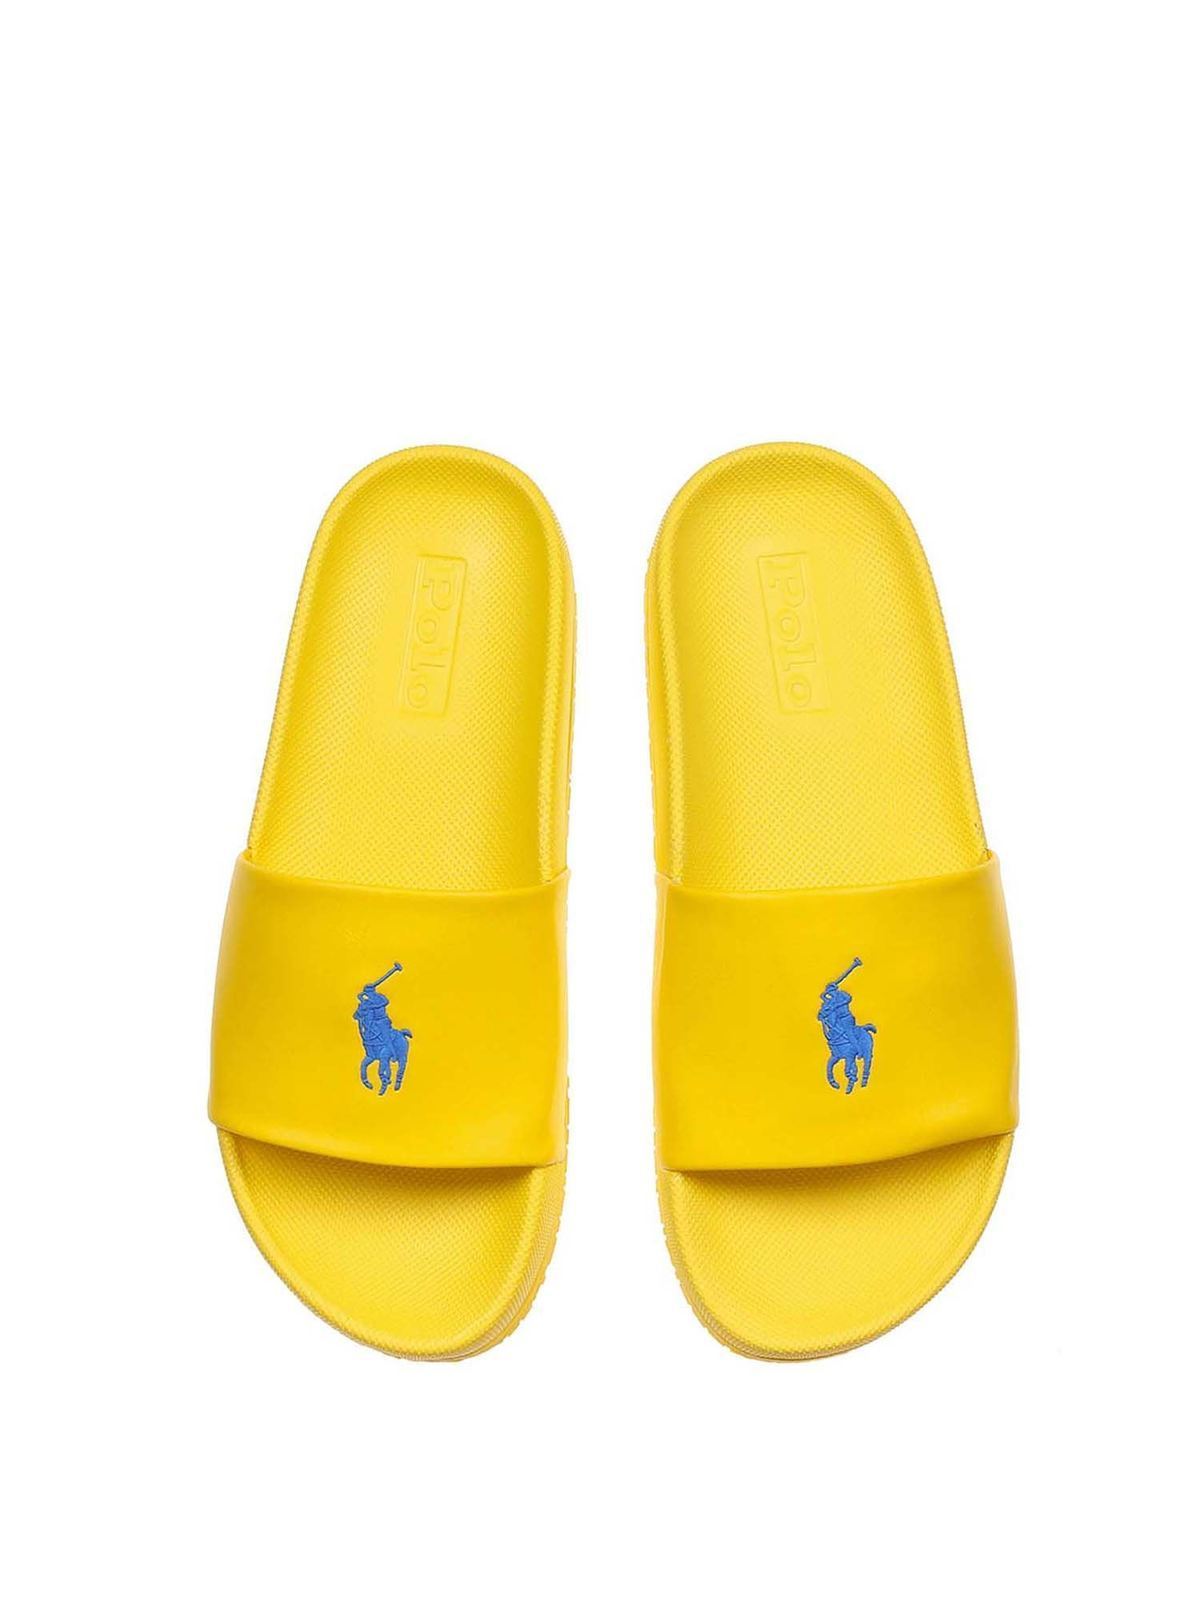 US Polo Slippers Blake 2DF21076A01 - 1ststepin